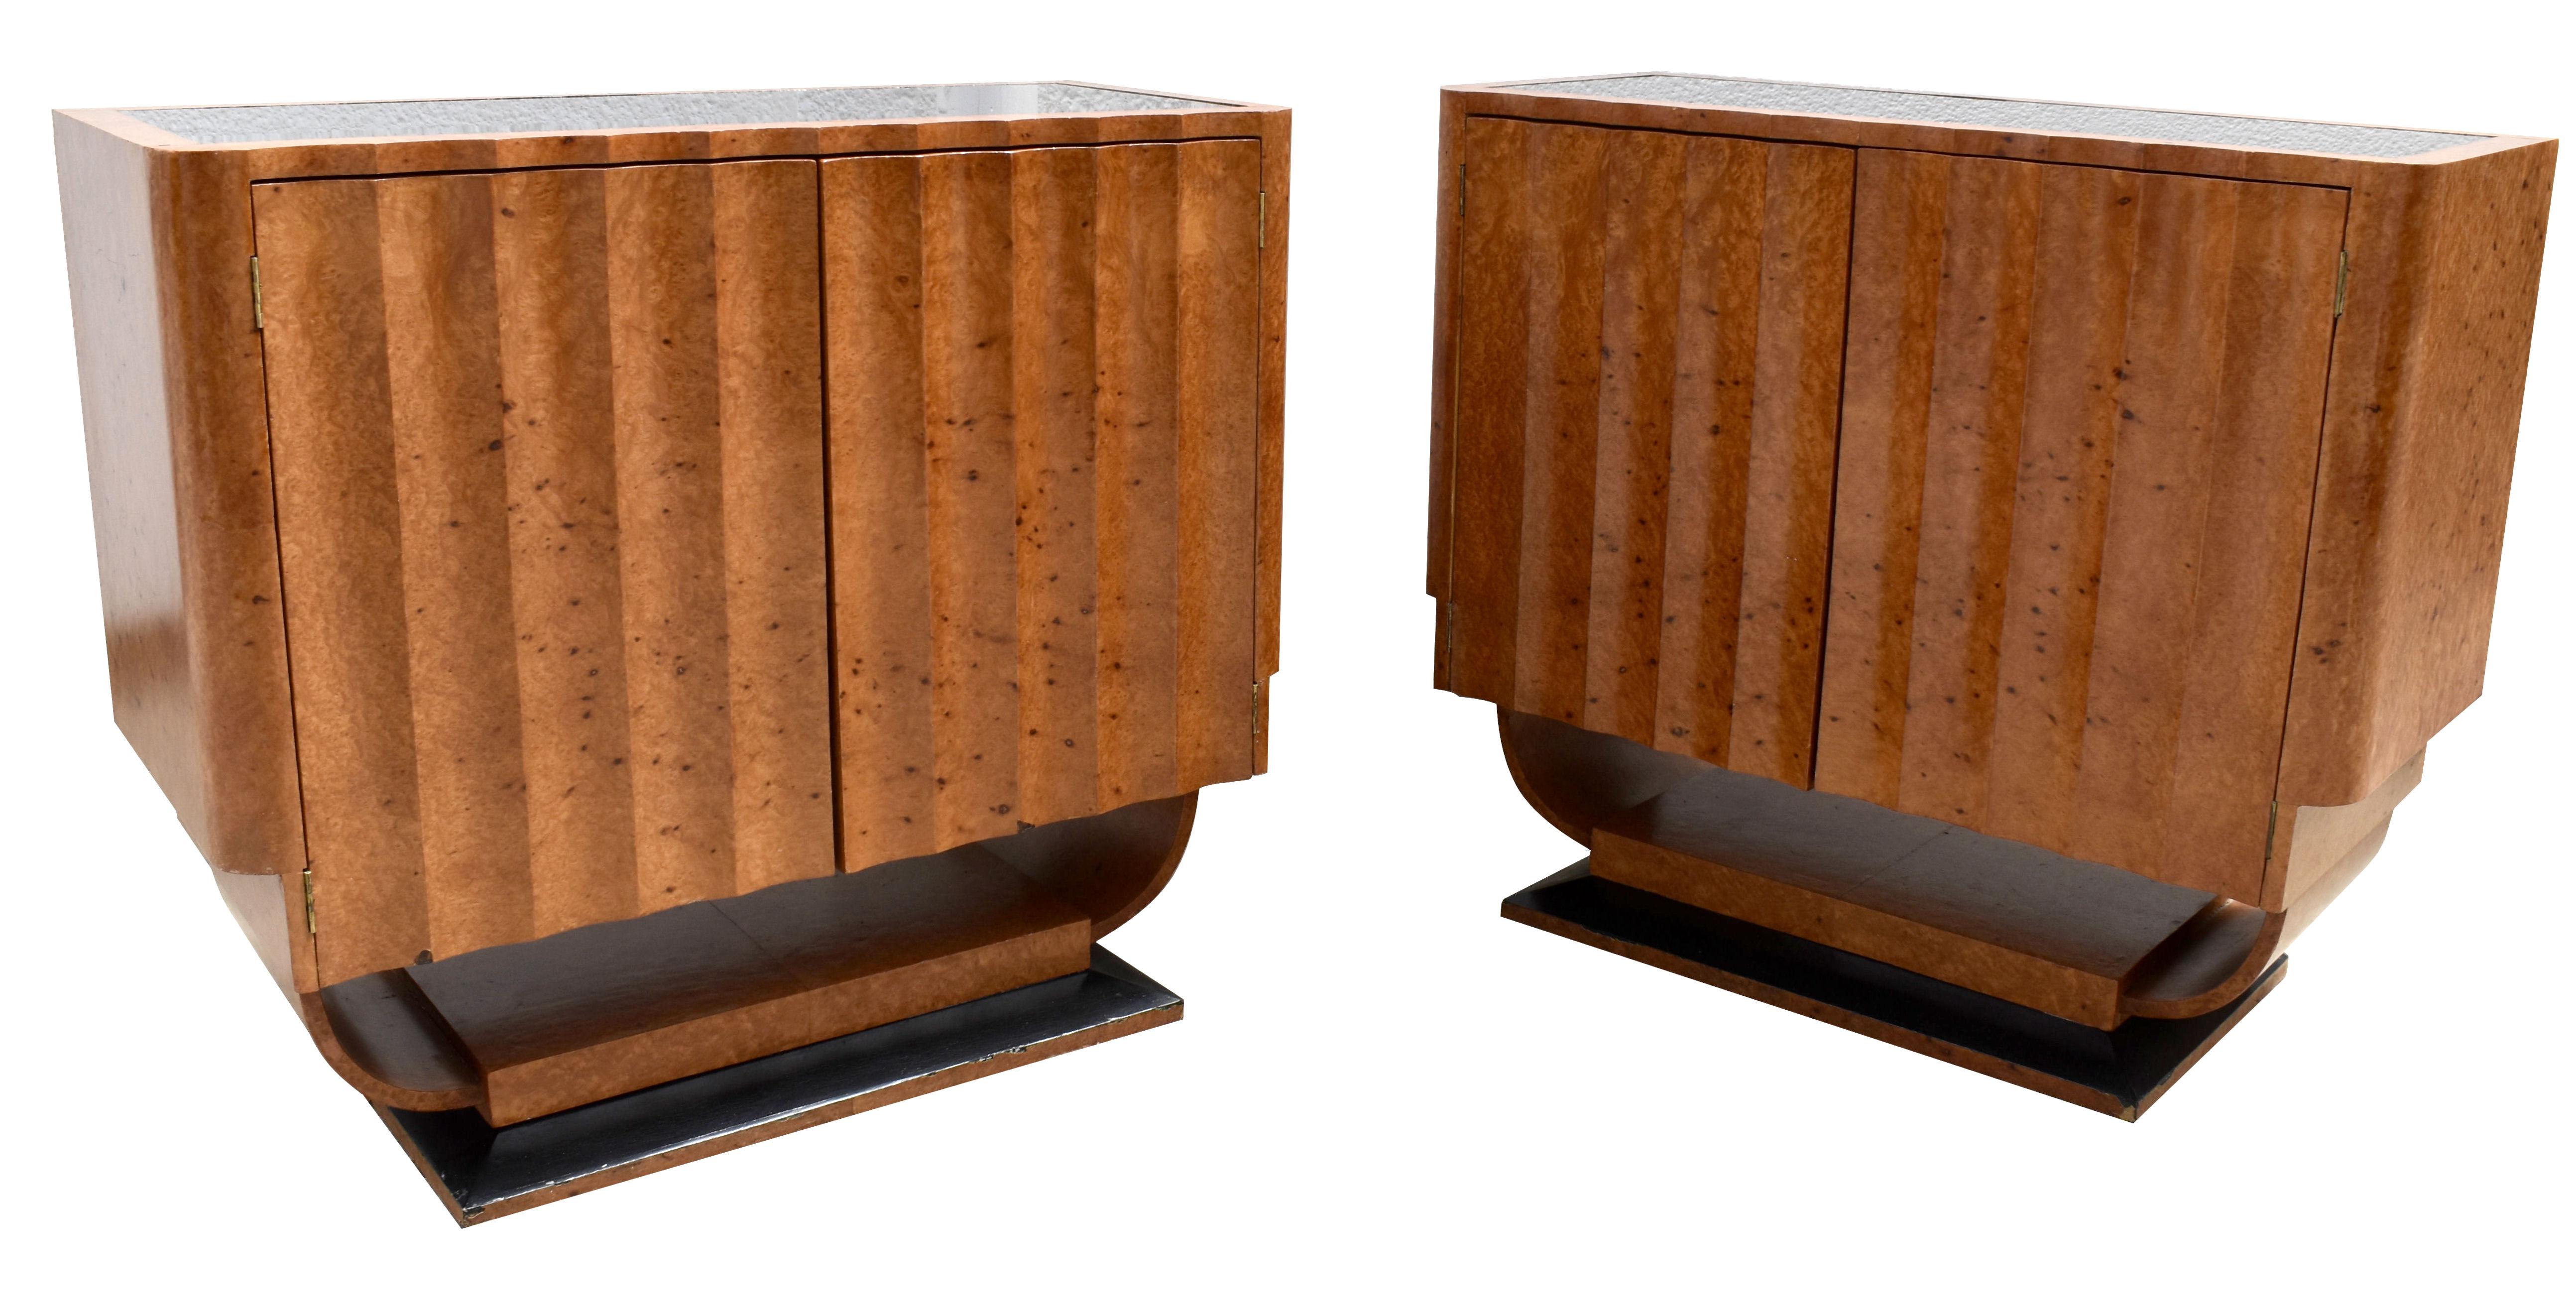 Sycamore Art Deco High End Matching Pair of U Base Console Sideboard Cabinets, C1930